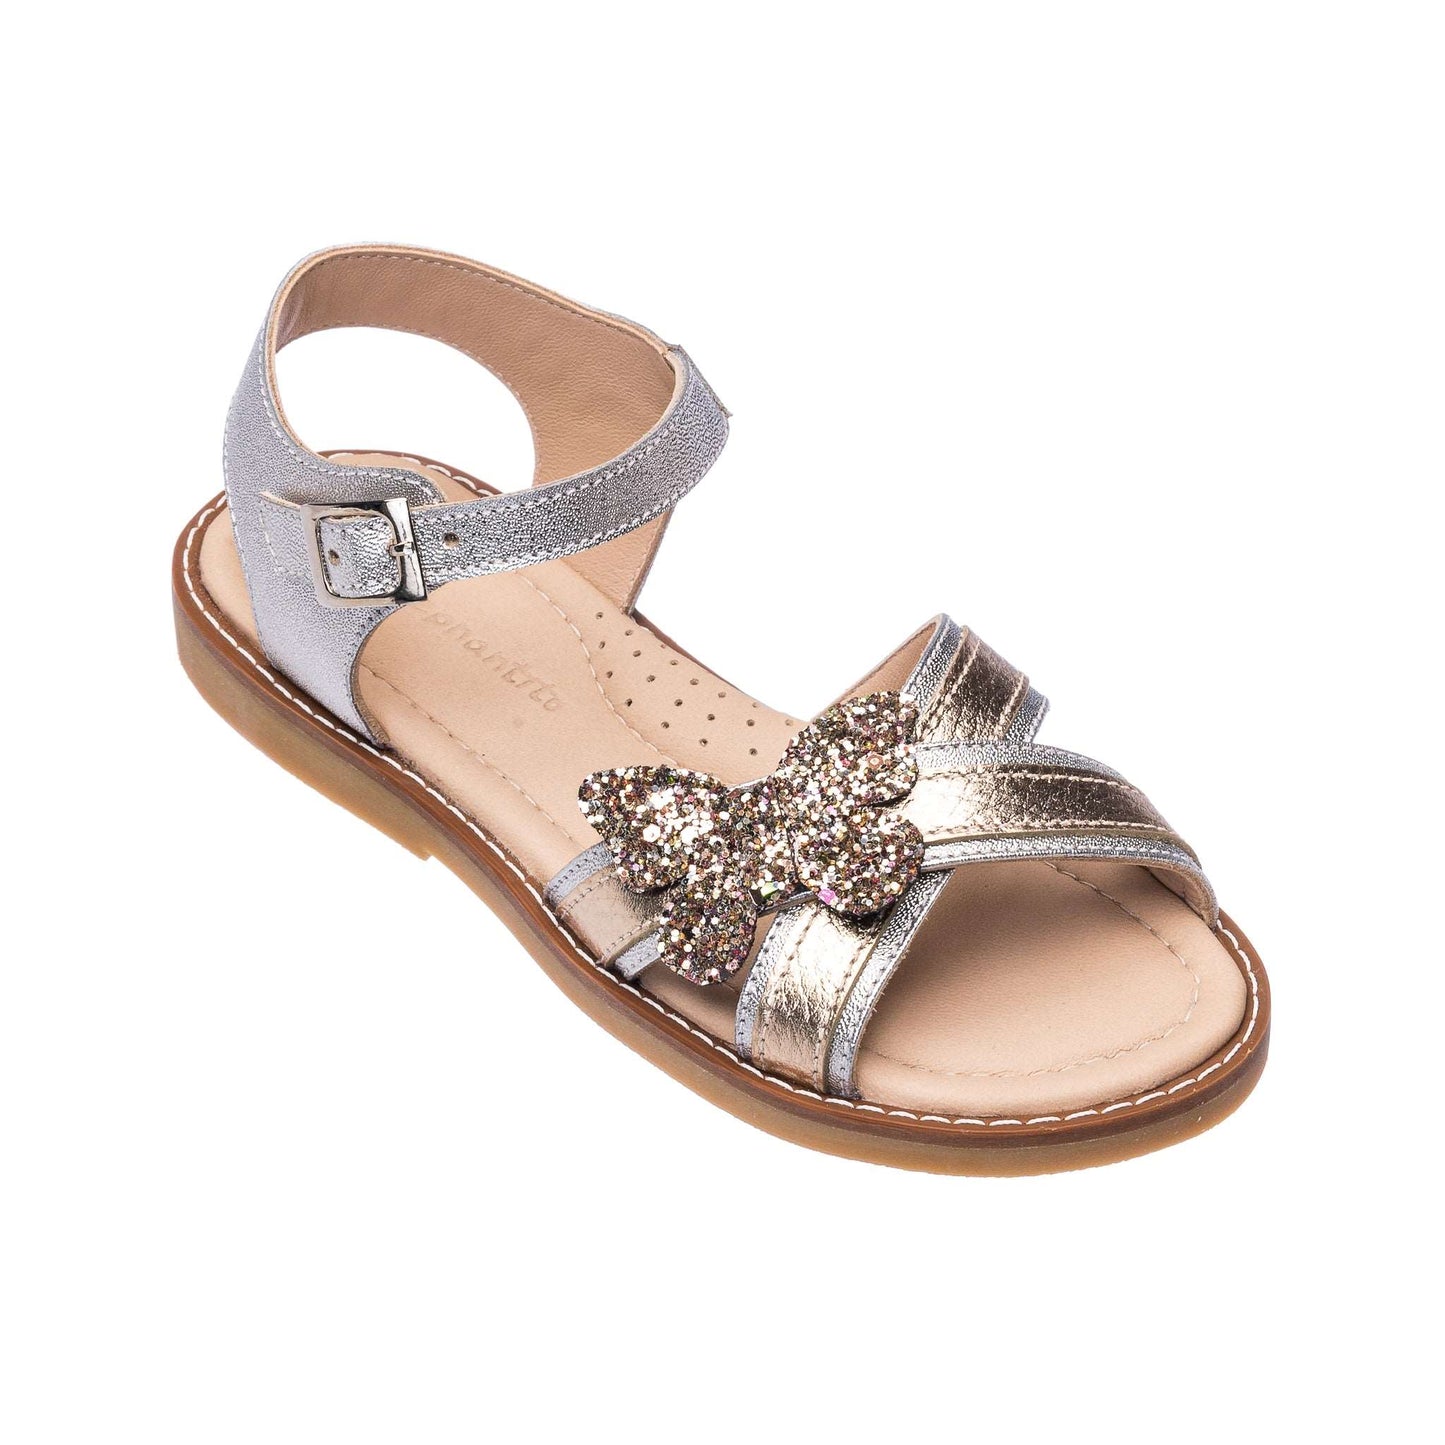 leather sandals for children fine leather – Elephantito